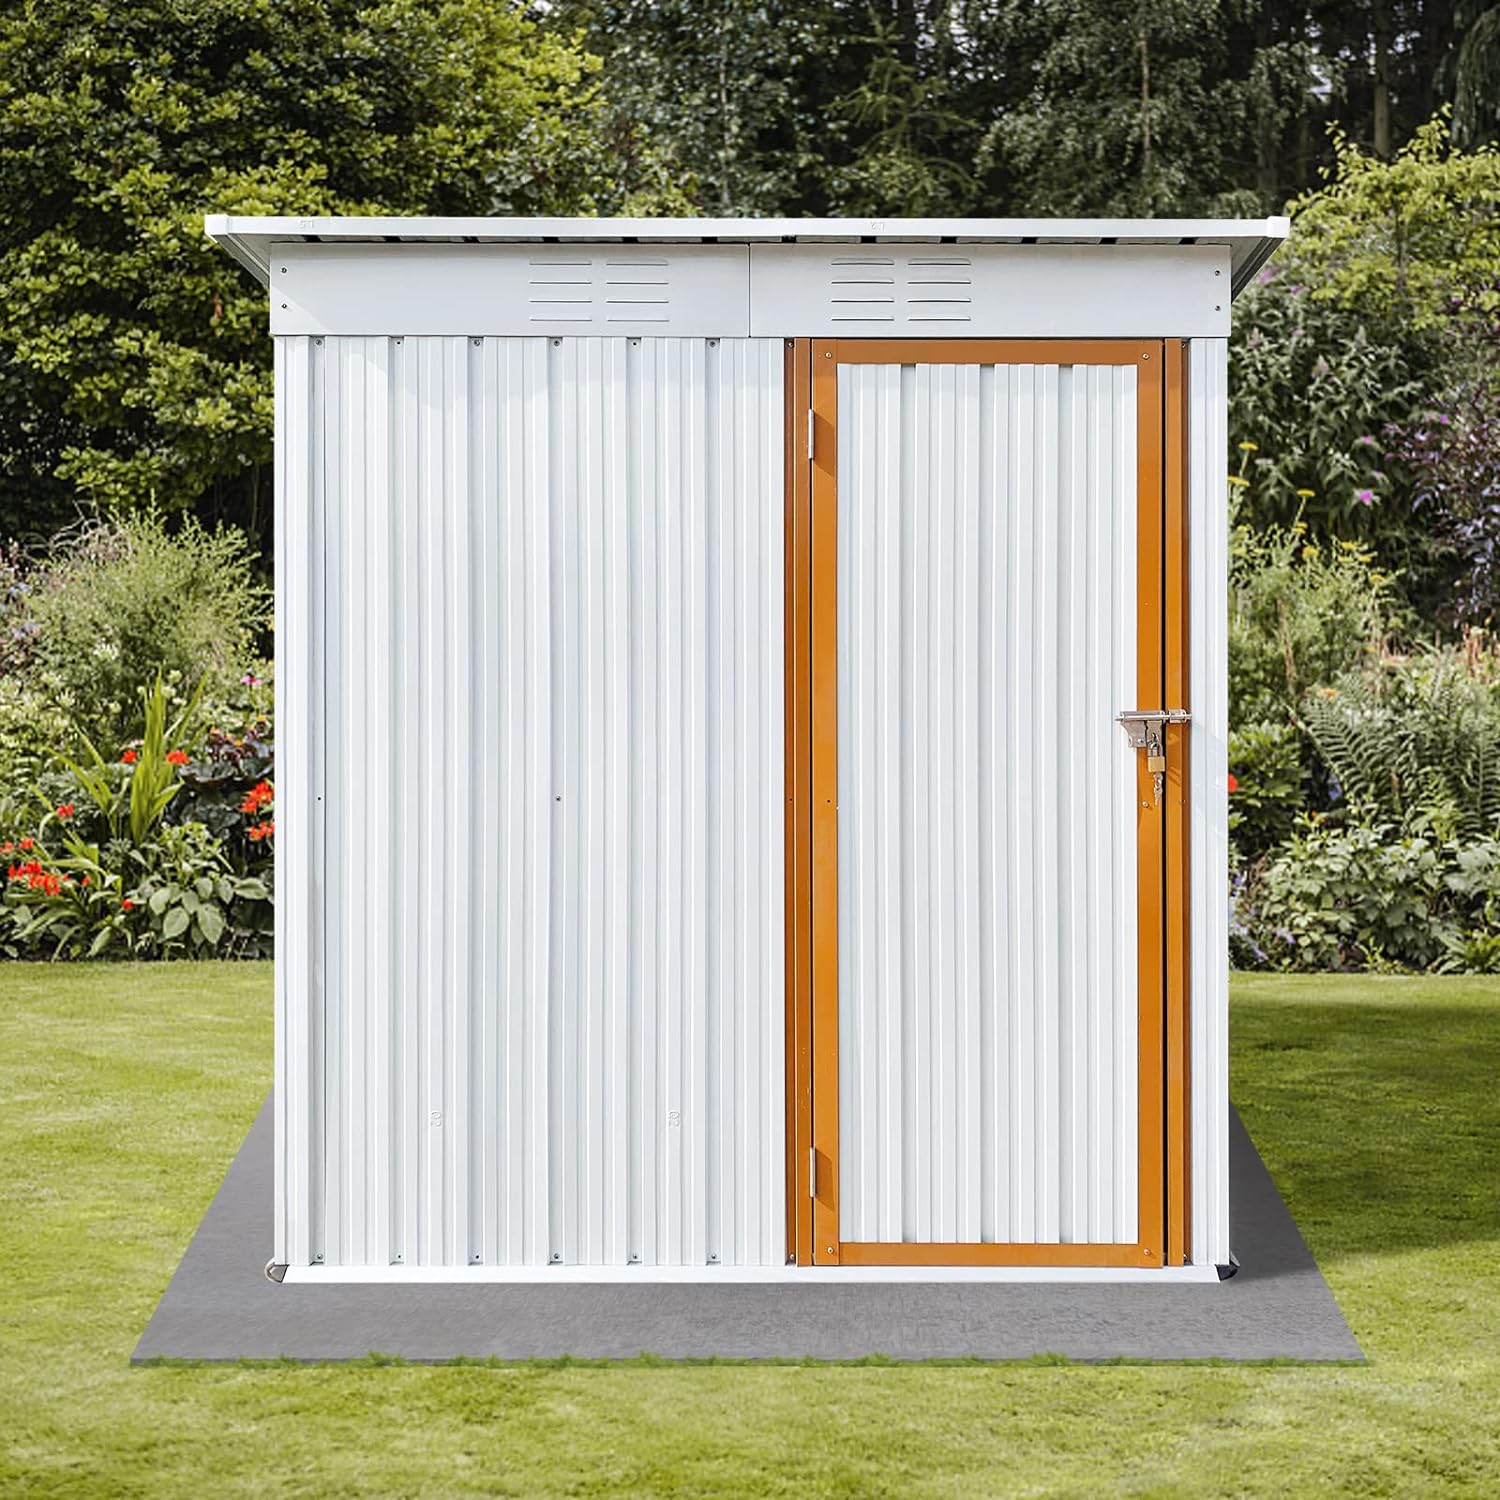 YOPTO 5x4 storage shed front view